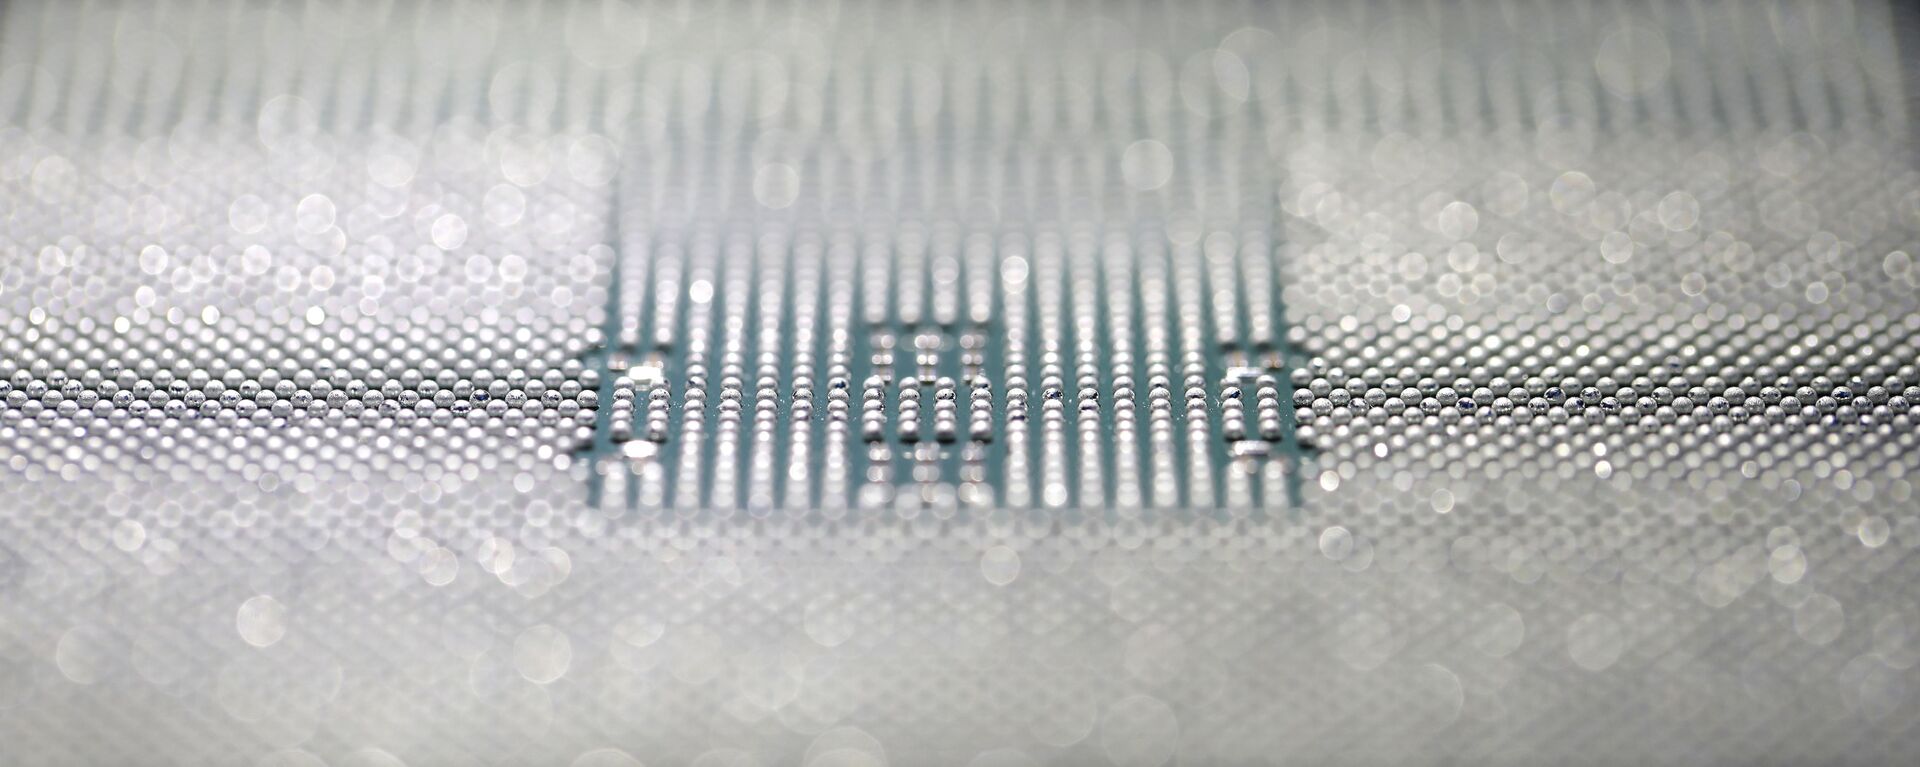 A Kunpeng 920 chip is displayed during an unveiling ceremony in Shenzhen, China, Monday, Jan. 7, 2019. Chinese telecom giant Huawei unveiled a processor chip for data centers and cloud computing as it expands into an emerging global market despite Western warnings the company might be a security risk.  - Sputnik International, 1920, 28.09.2023